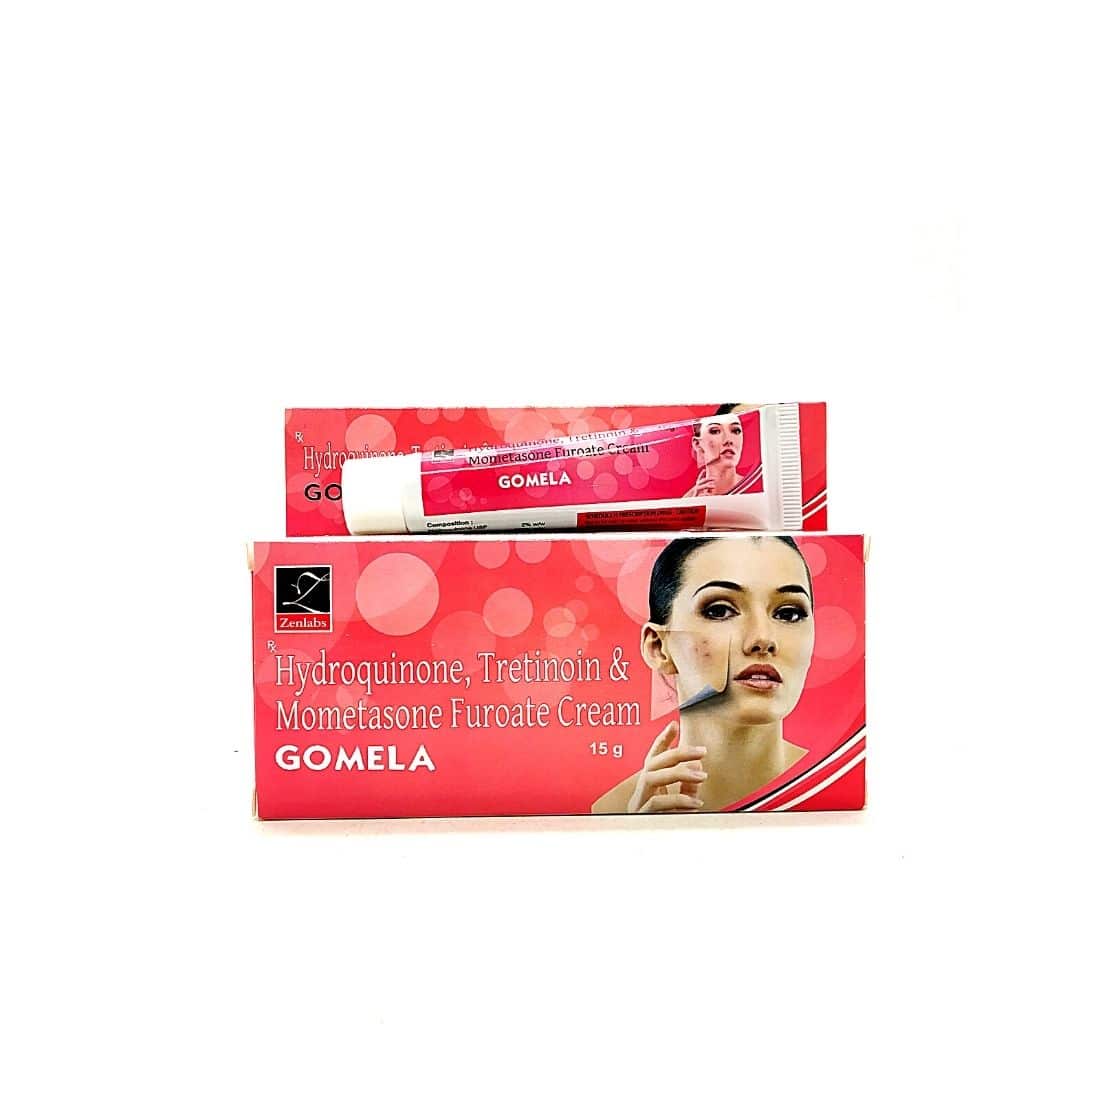 Gomela Cream Uses makes the skin glow brighter, removes dark spots on the face and prevents you from getting lumpy.